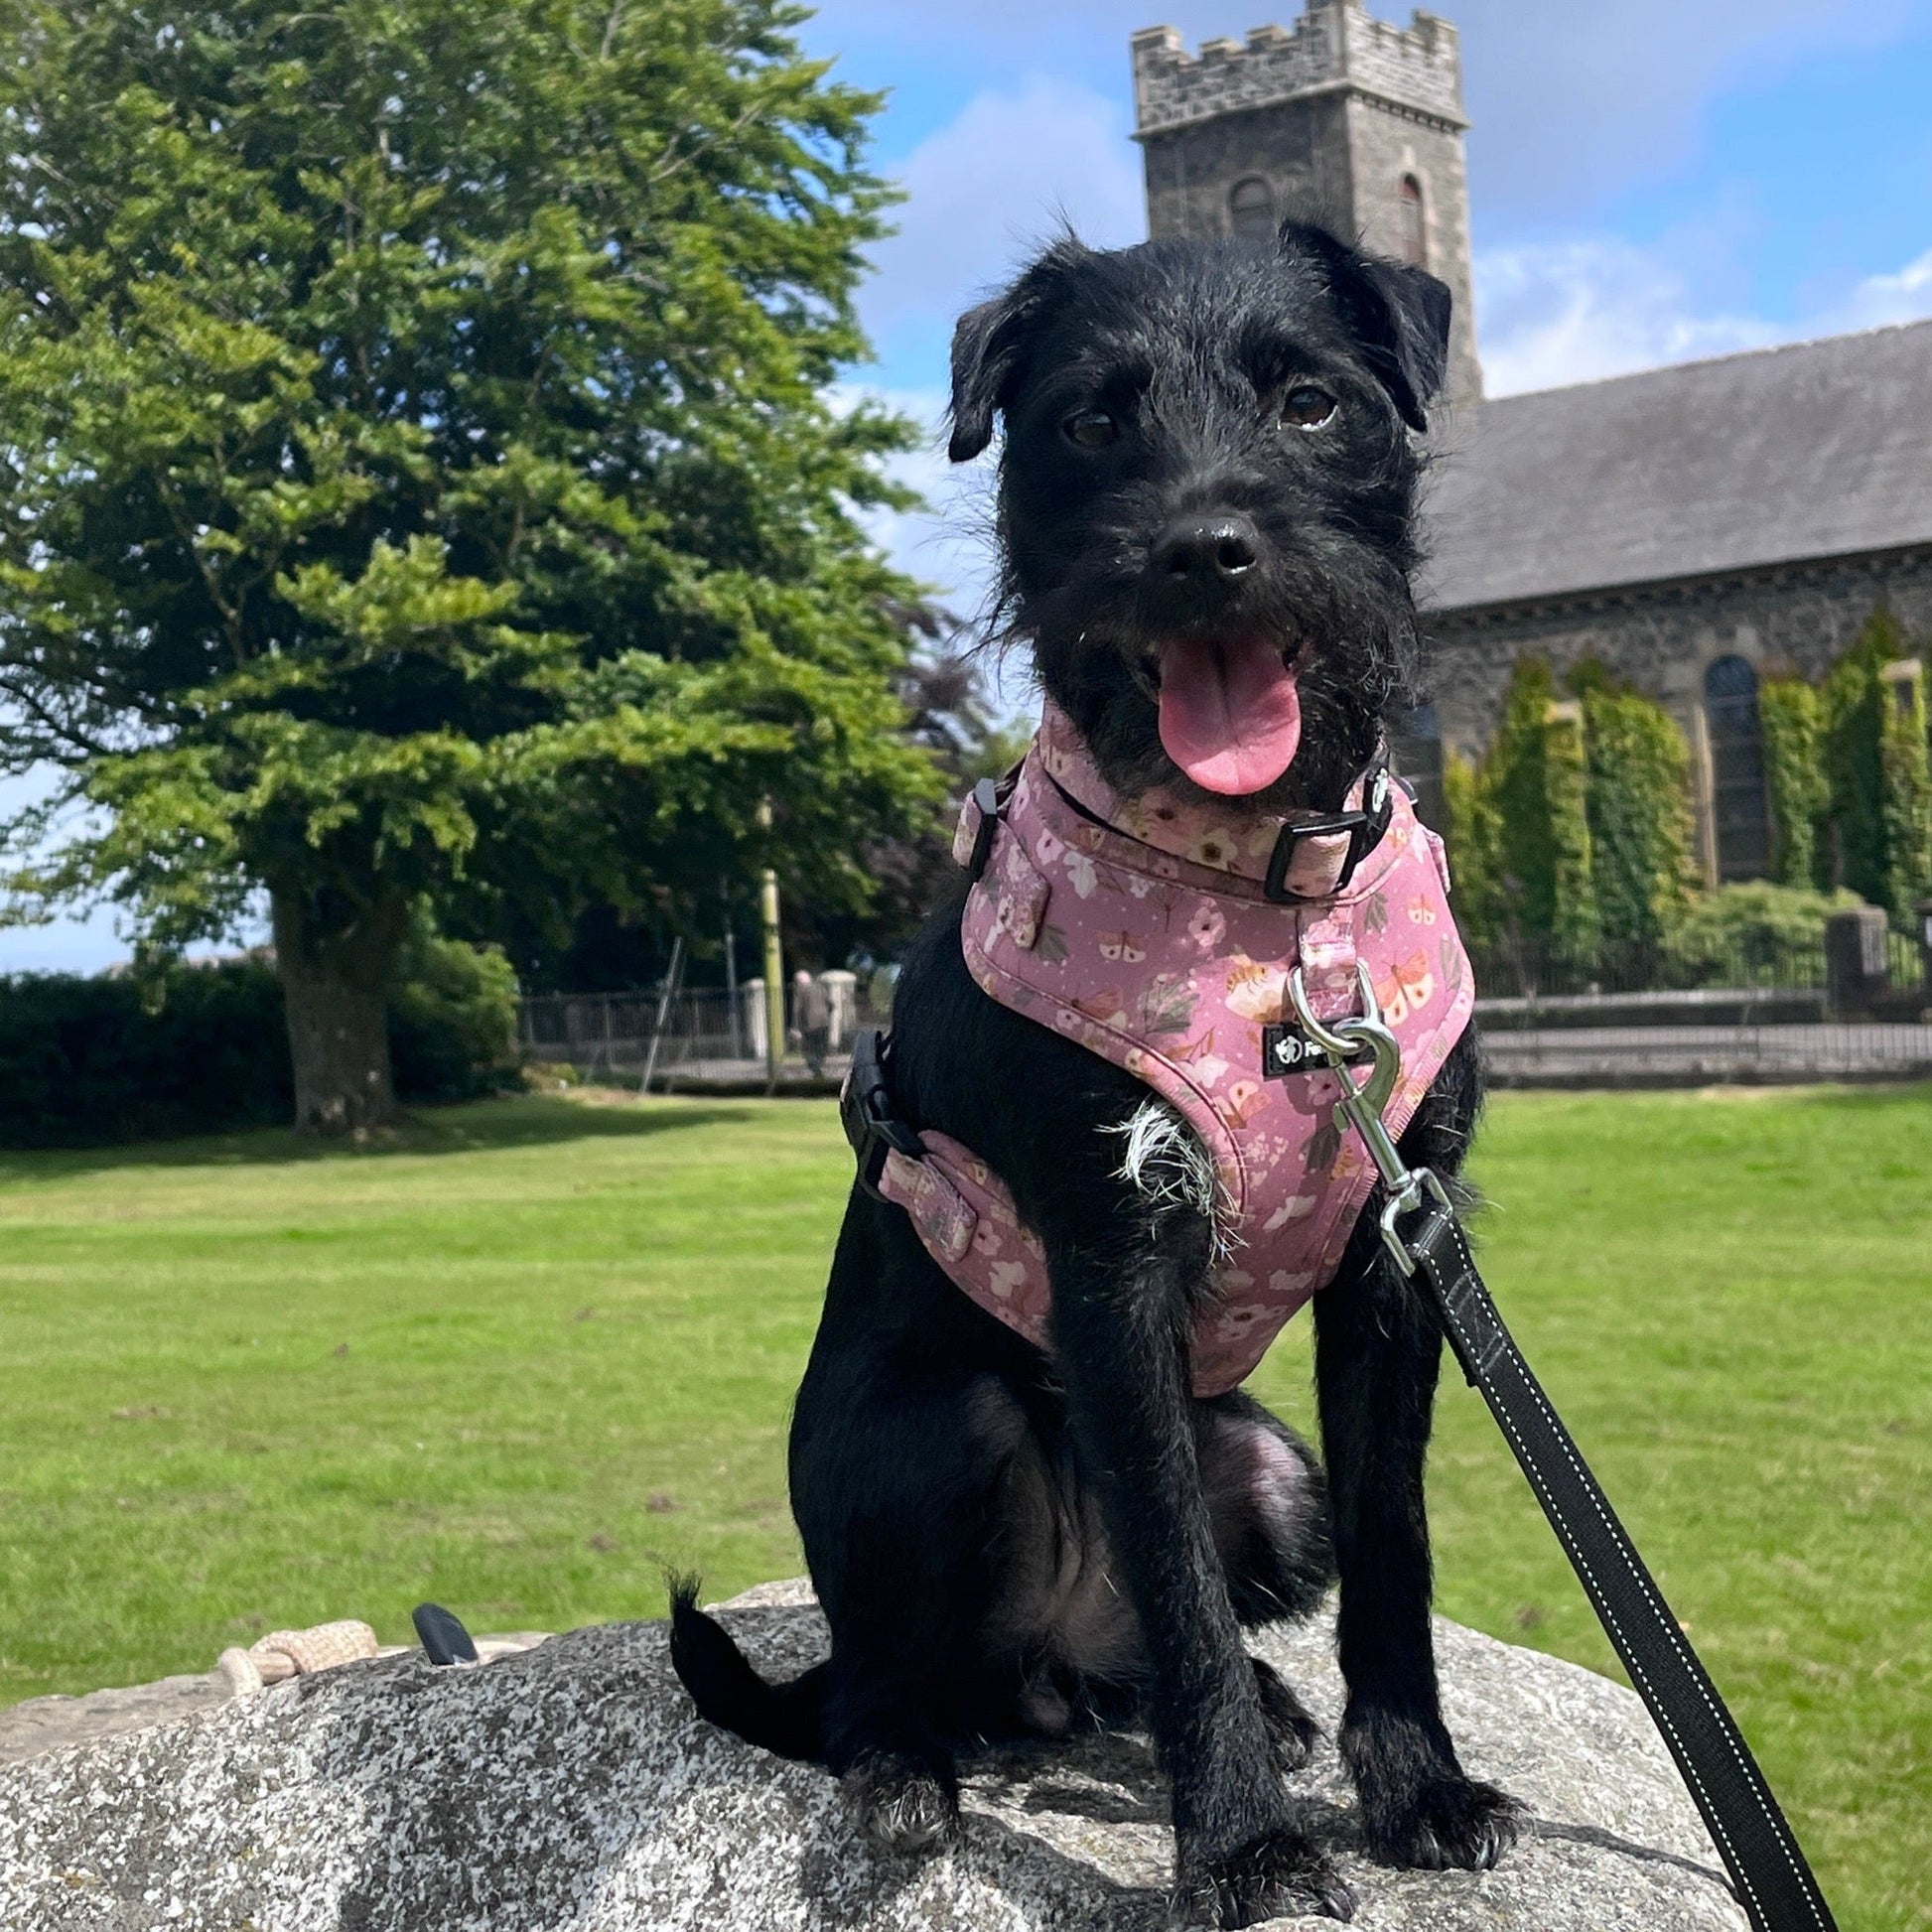 a photo of a black dog wearing a pink floral harness and matching collar  sitting on a rock with a castle and green grass in the background